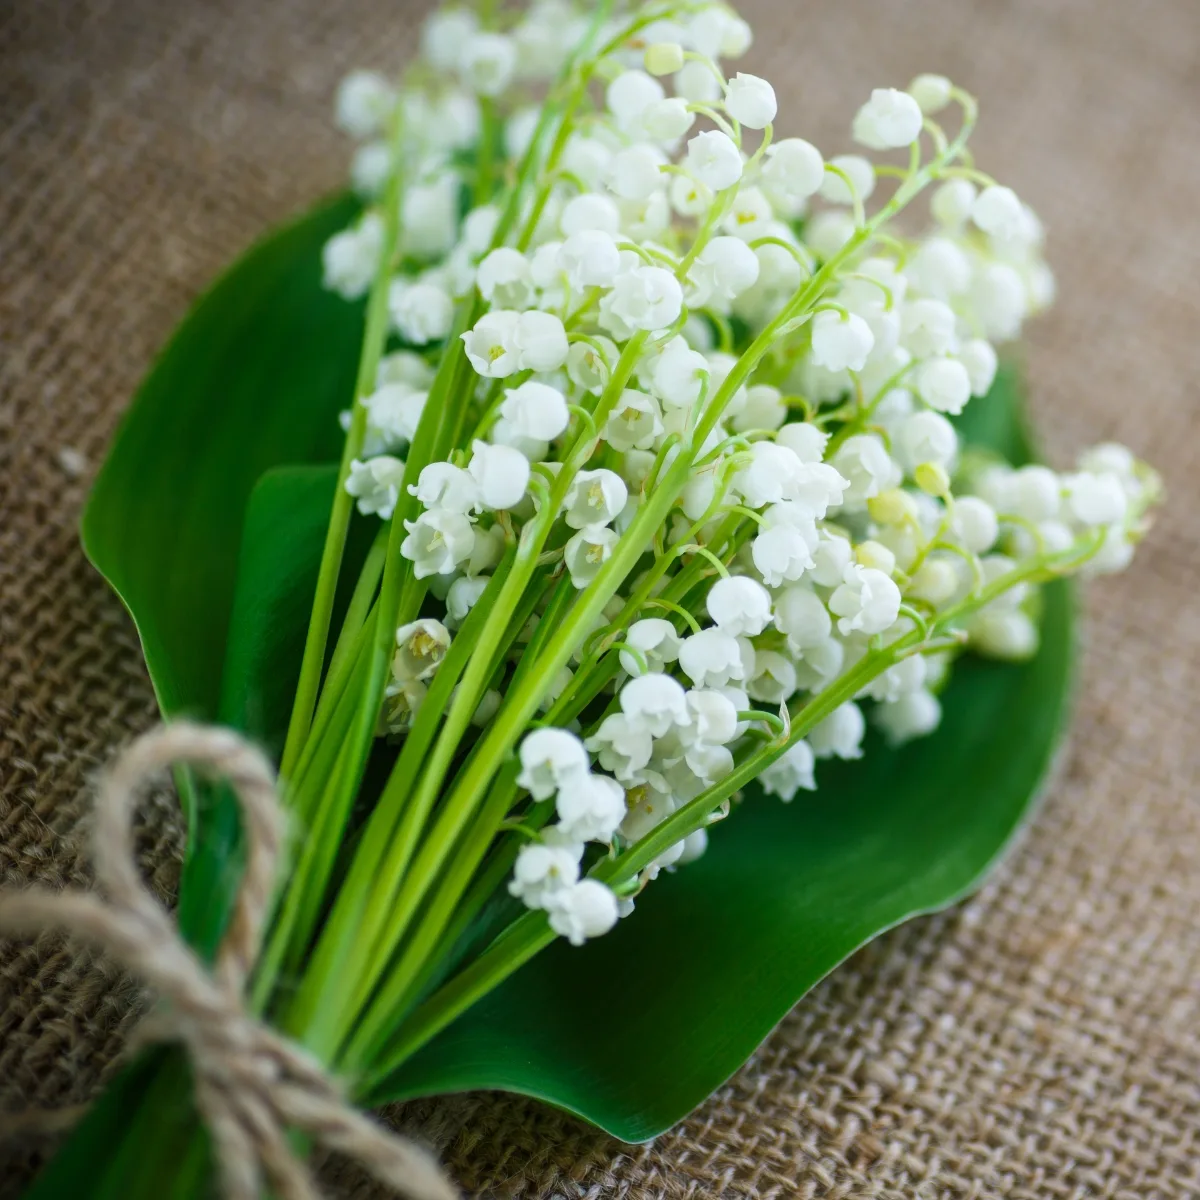 Lily Of The Valley Care: Growing Lily Of The Valley Flowers